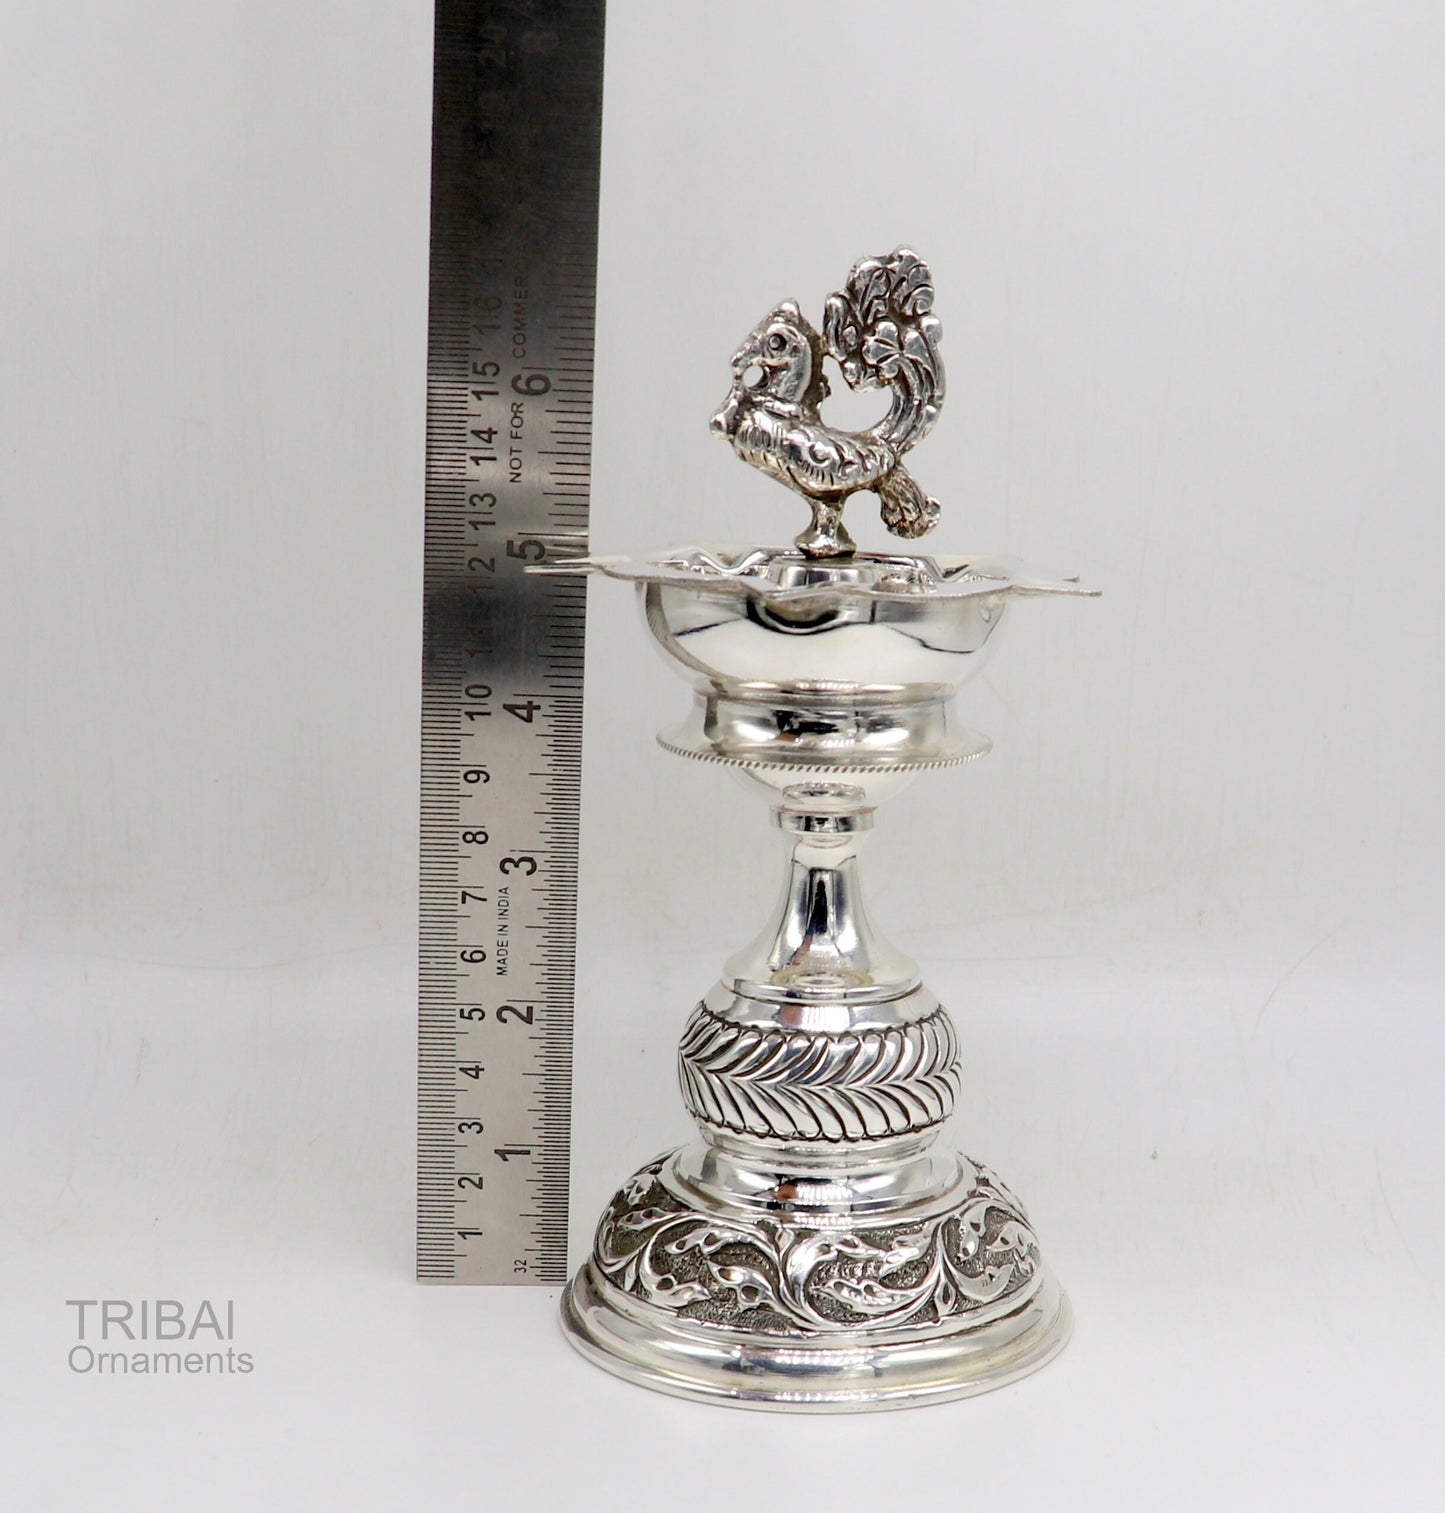 925 sterling silver handcrafted vintage work oil lamp or candle stand, silver Deepak, silver article, puja utensils, silver figurine su587 - TRIBAL ORNAMENTS